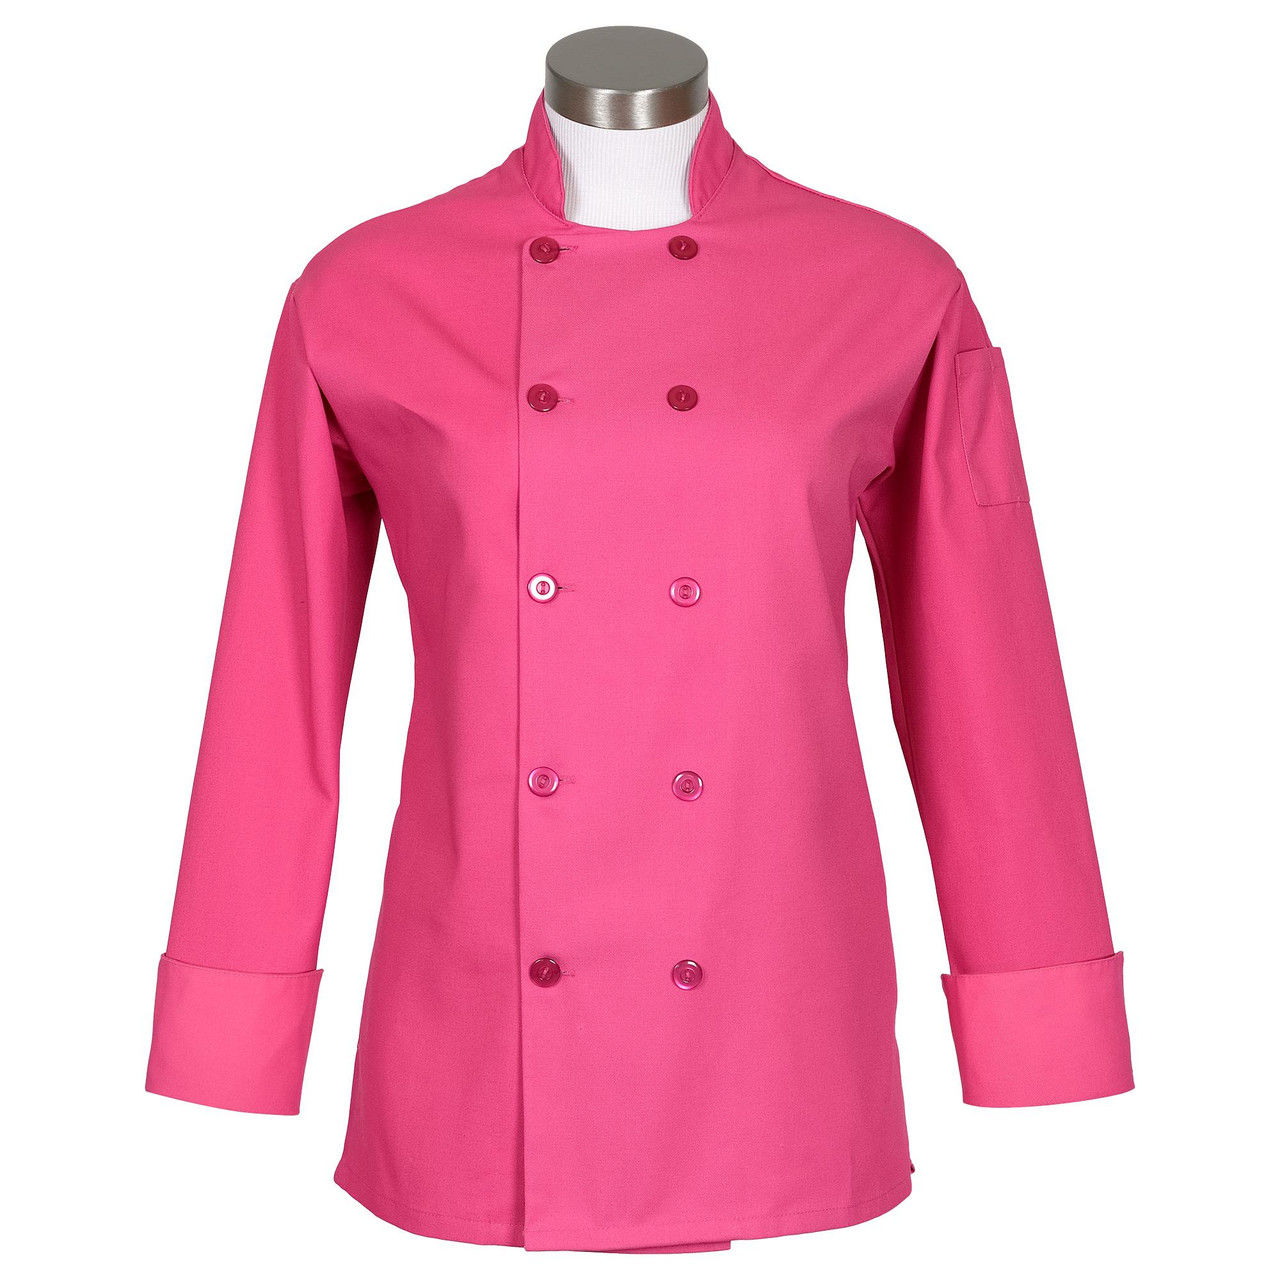 Is the front closure of the chef coats womens long sleeve reversible?